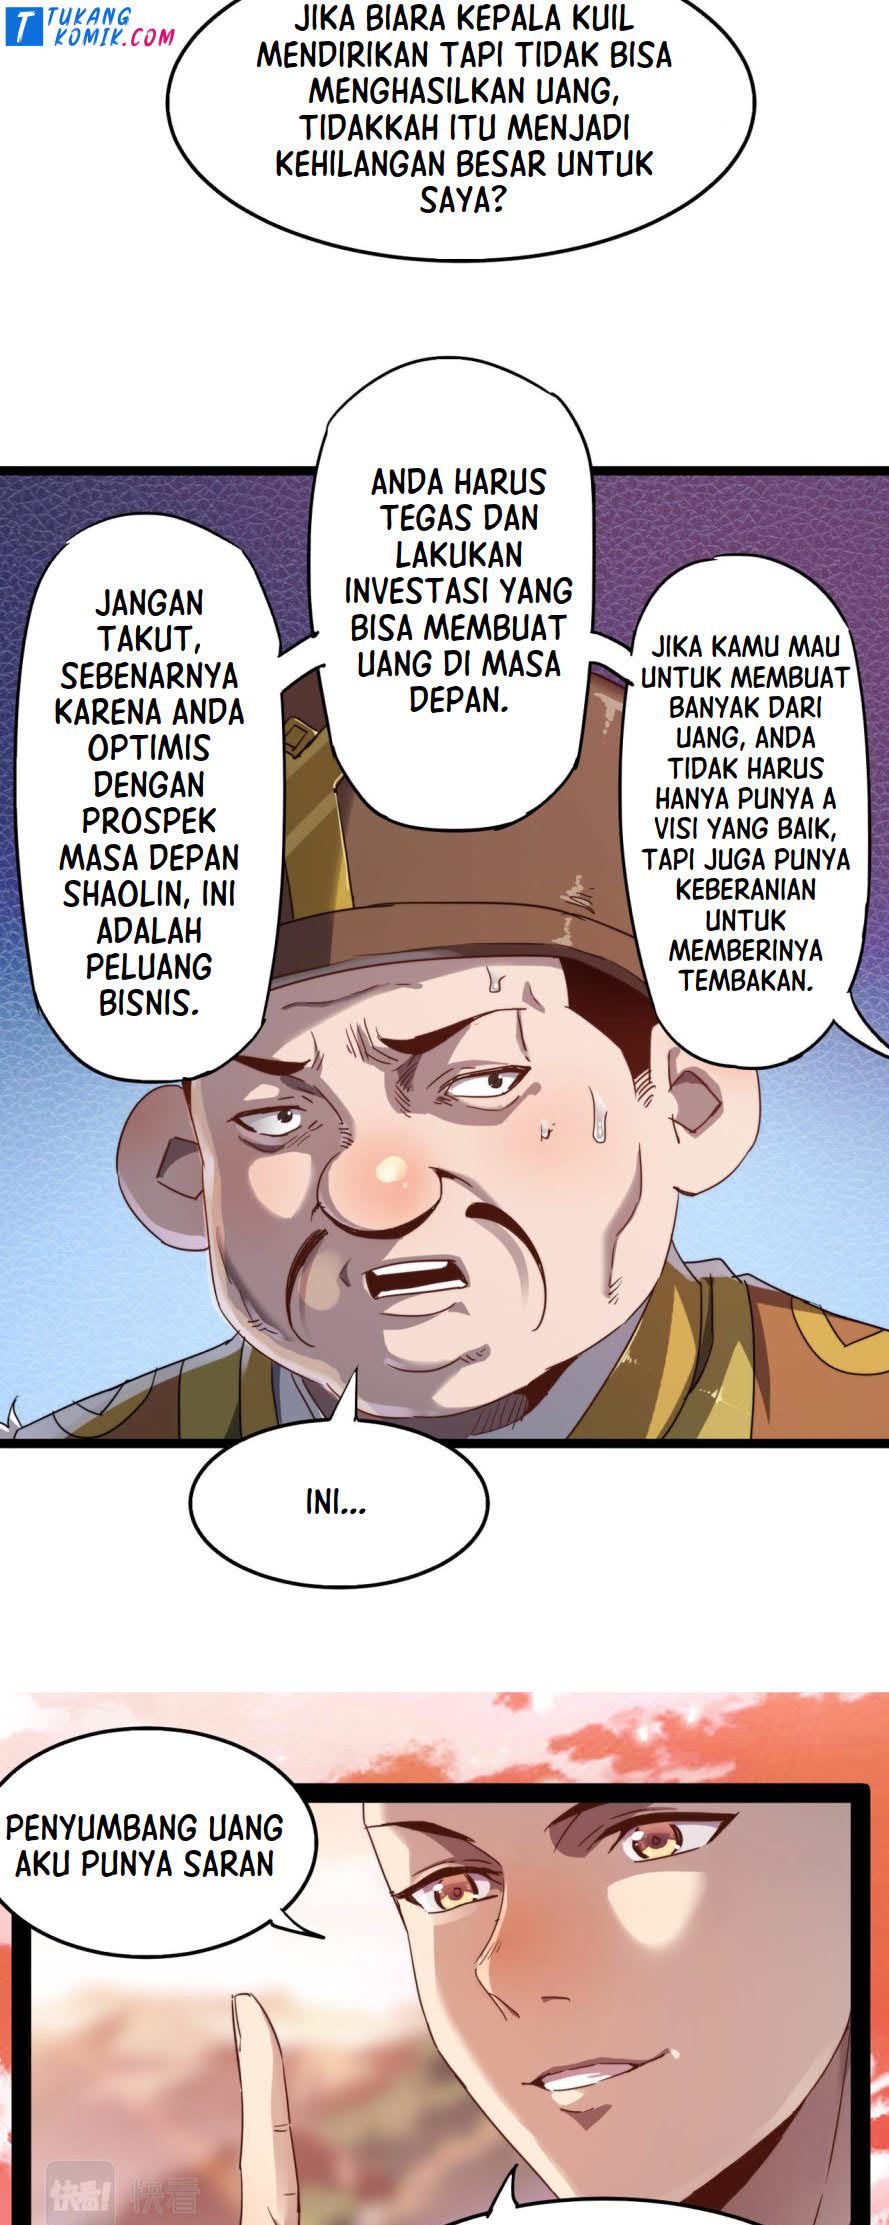 Dilarang COPAS - situs resmi www.mangacanblog.com - Komik building the strongest shaolin temple in another world 007 - chapter 7 8 Indonesia building the strongest shaolin temple in another world 007 - chapter 7 Terbaru 12|Baca Manga Komik Indonesia|Mangacan